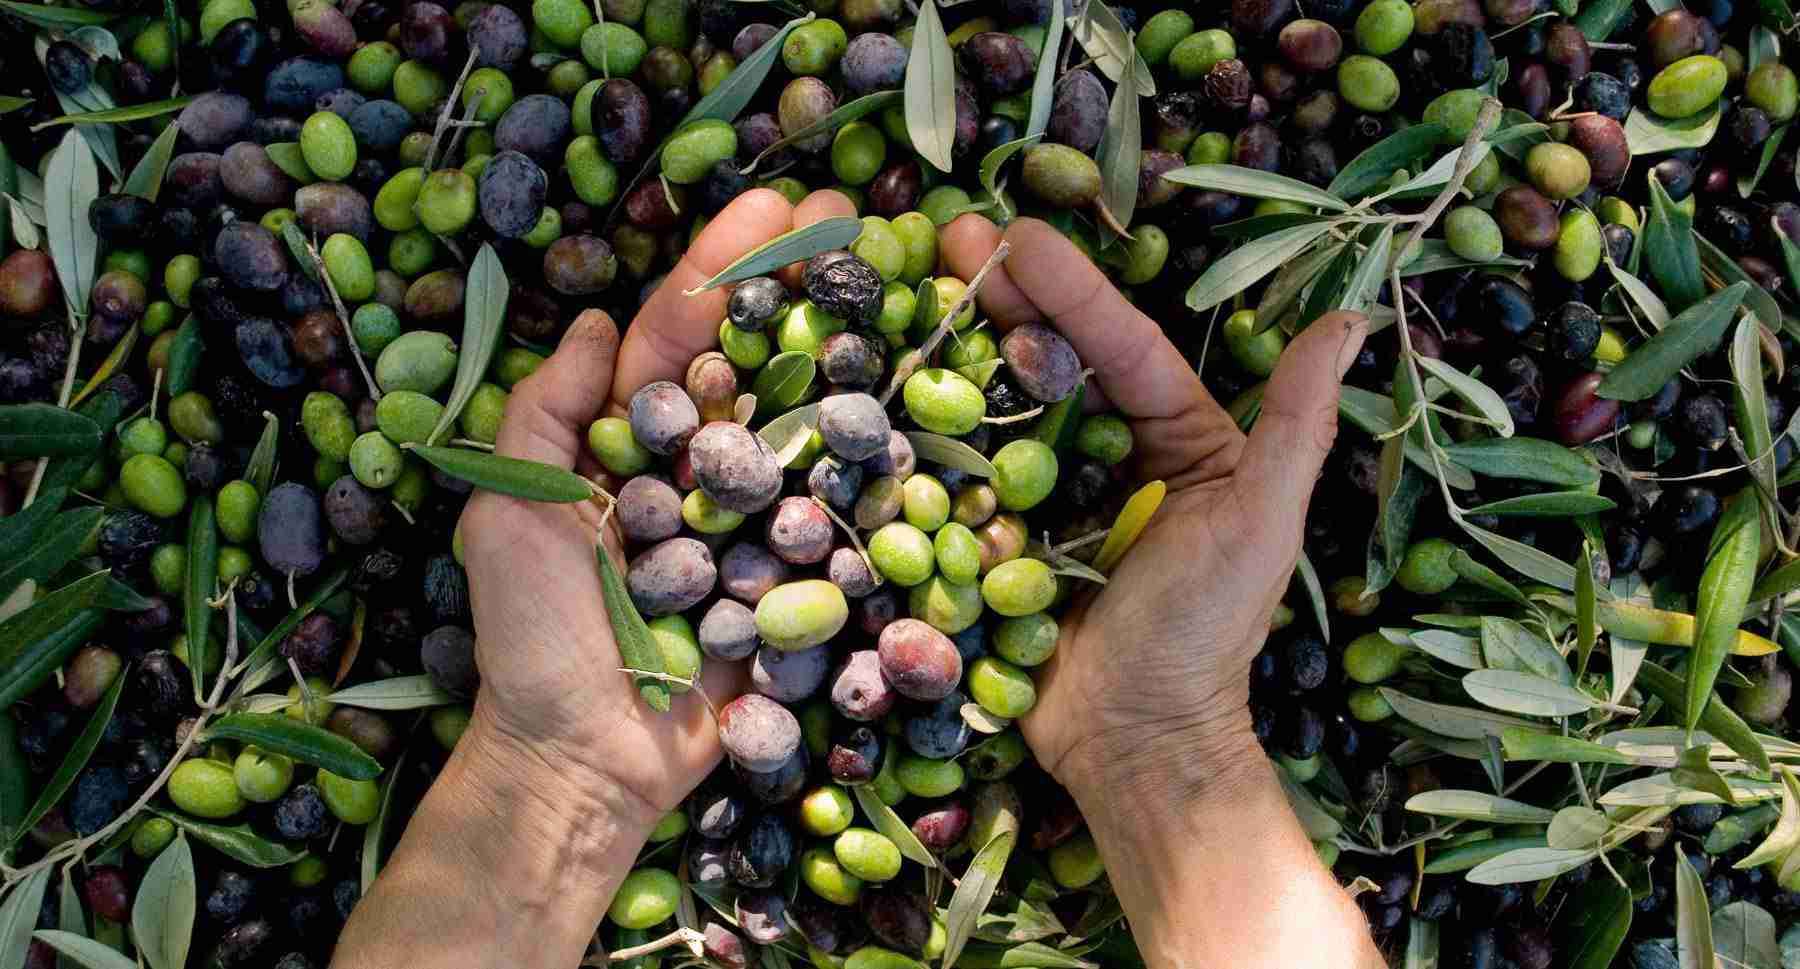 Why choose an Organic Extra Virgin Olive Oil